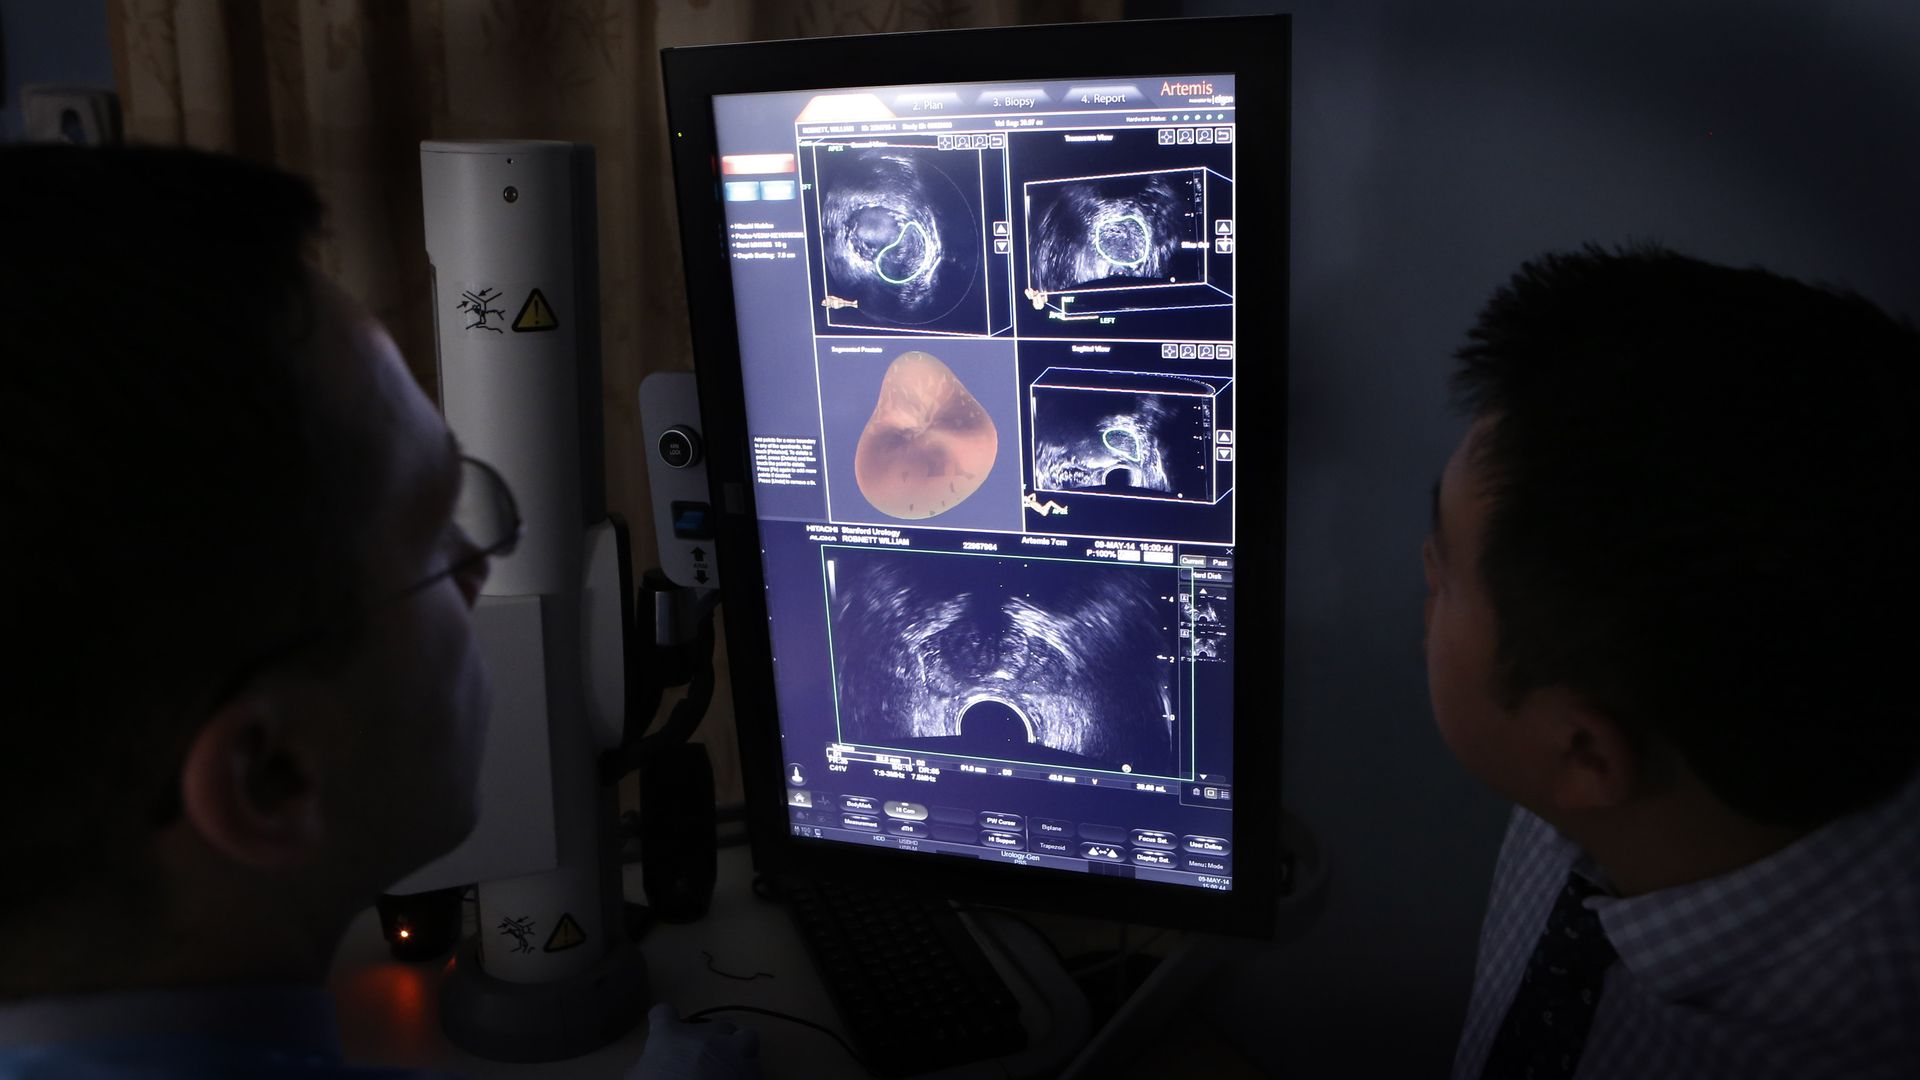 Ultrasound and MRI images are combined to increase accuracy of taking biopsies from the prostate of a patient.